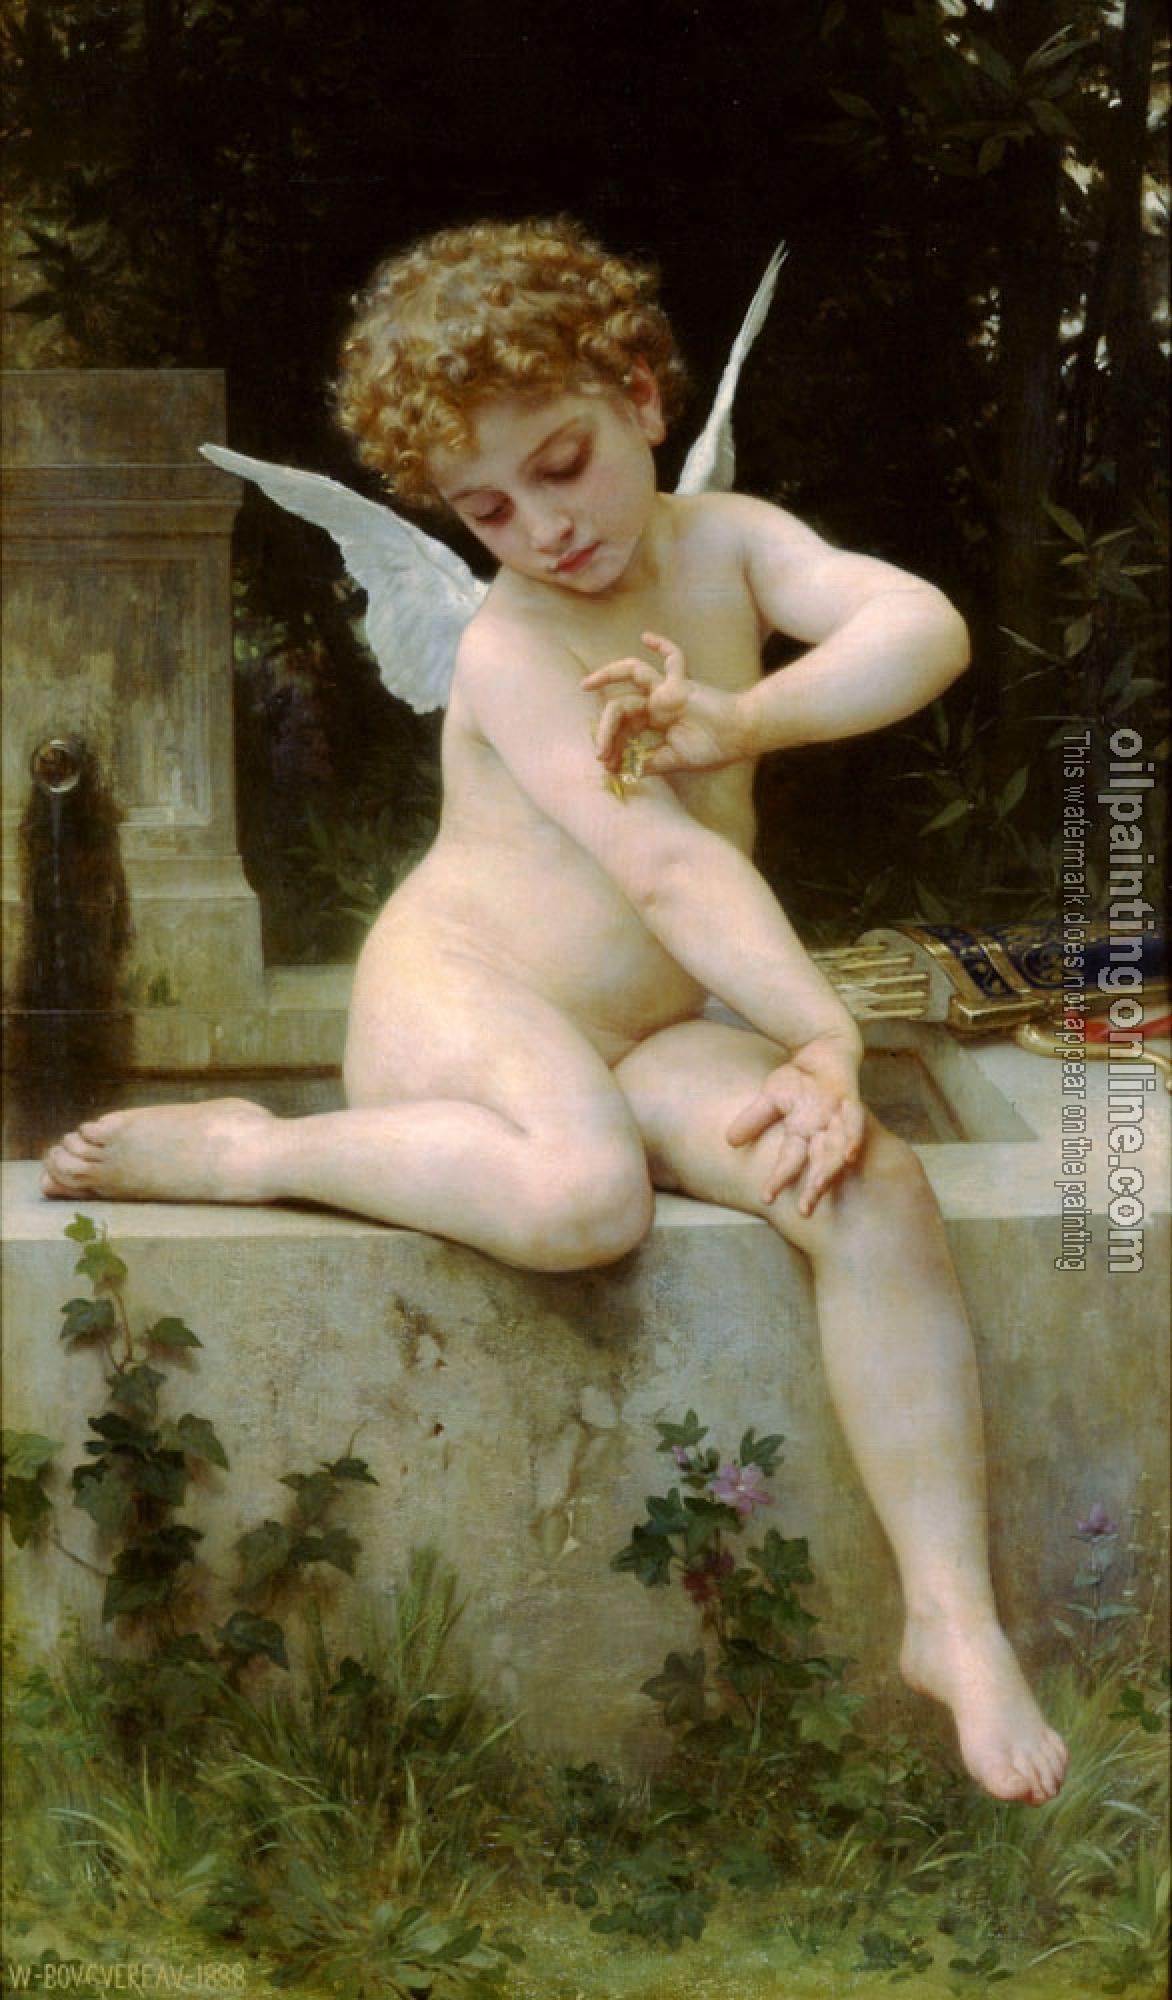 Bouguereau, William-Adolphe - Cupid with a Butterfly